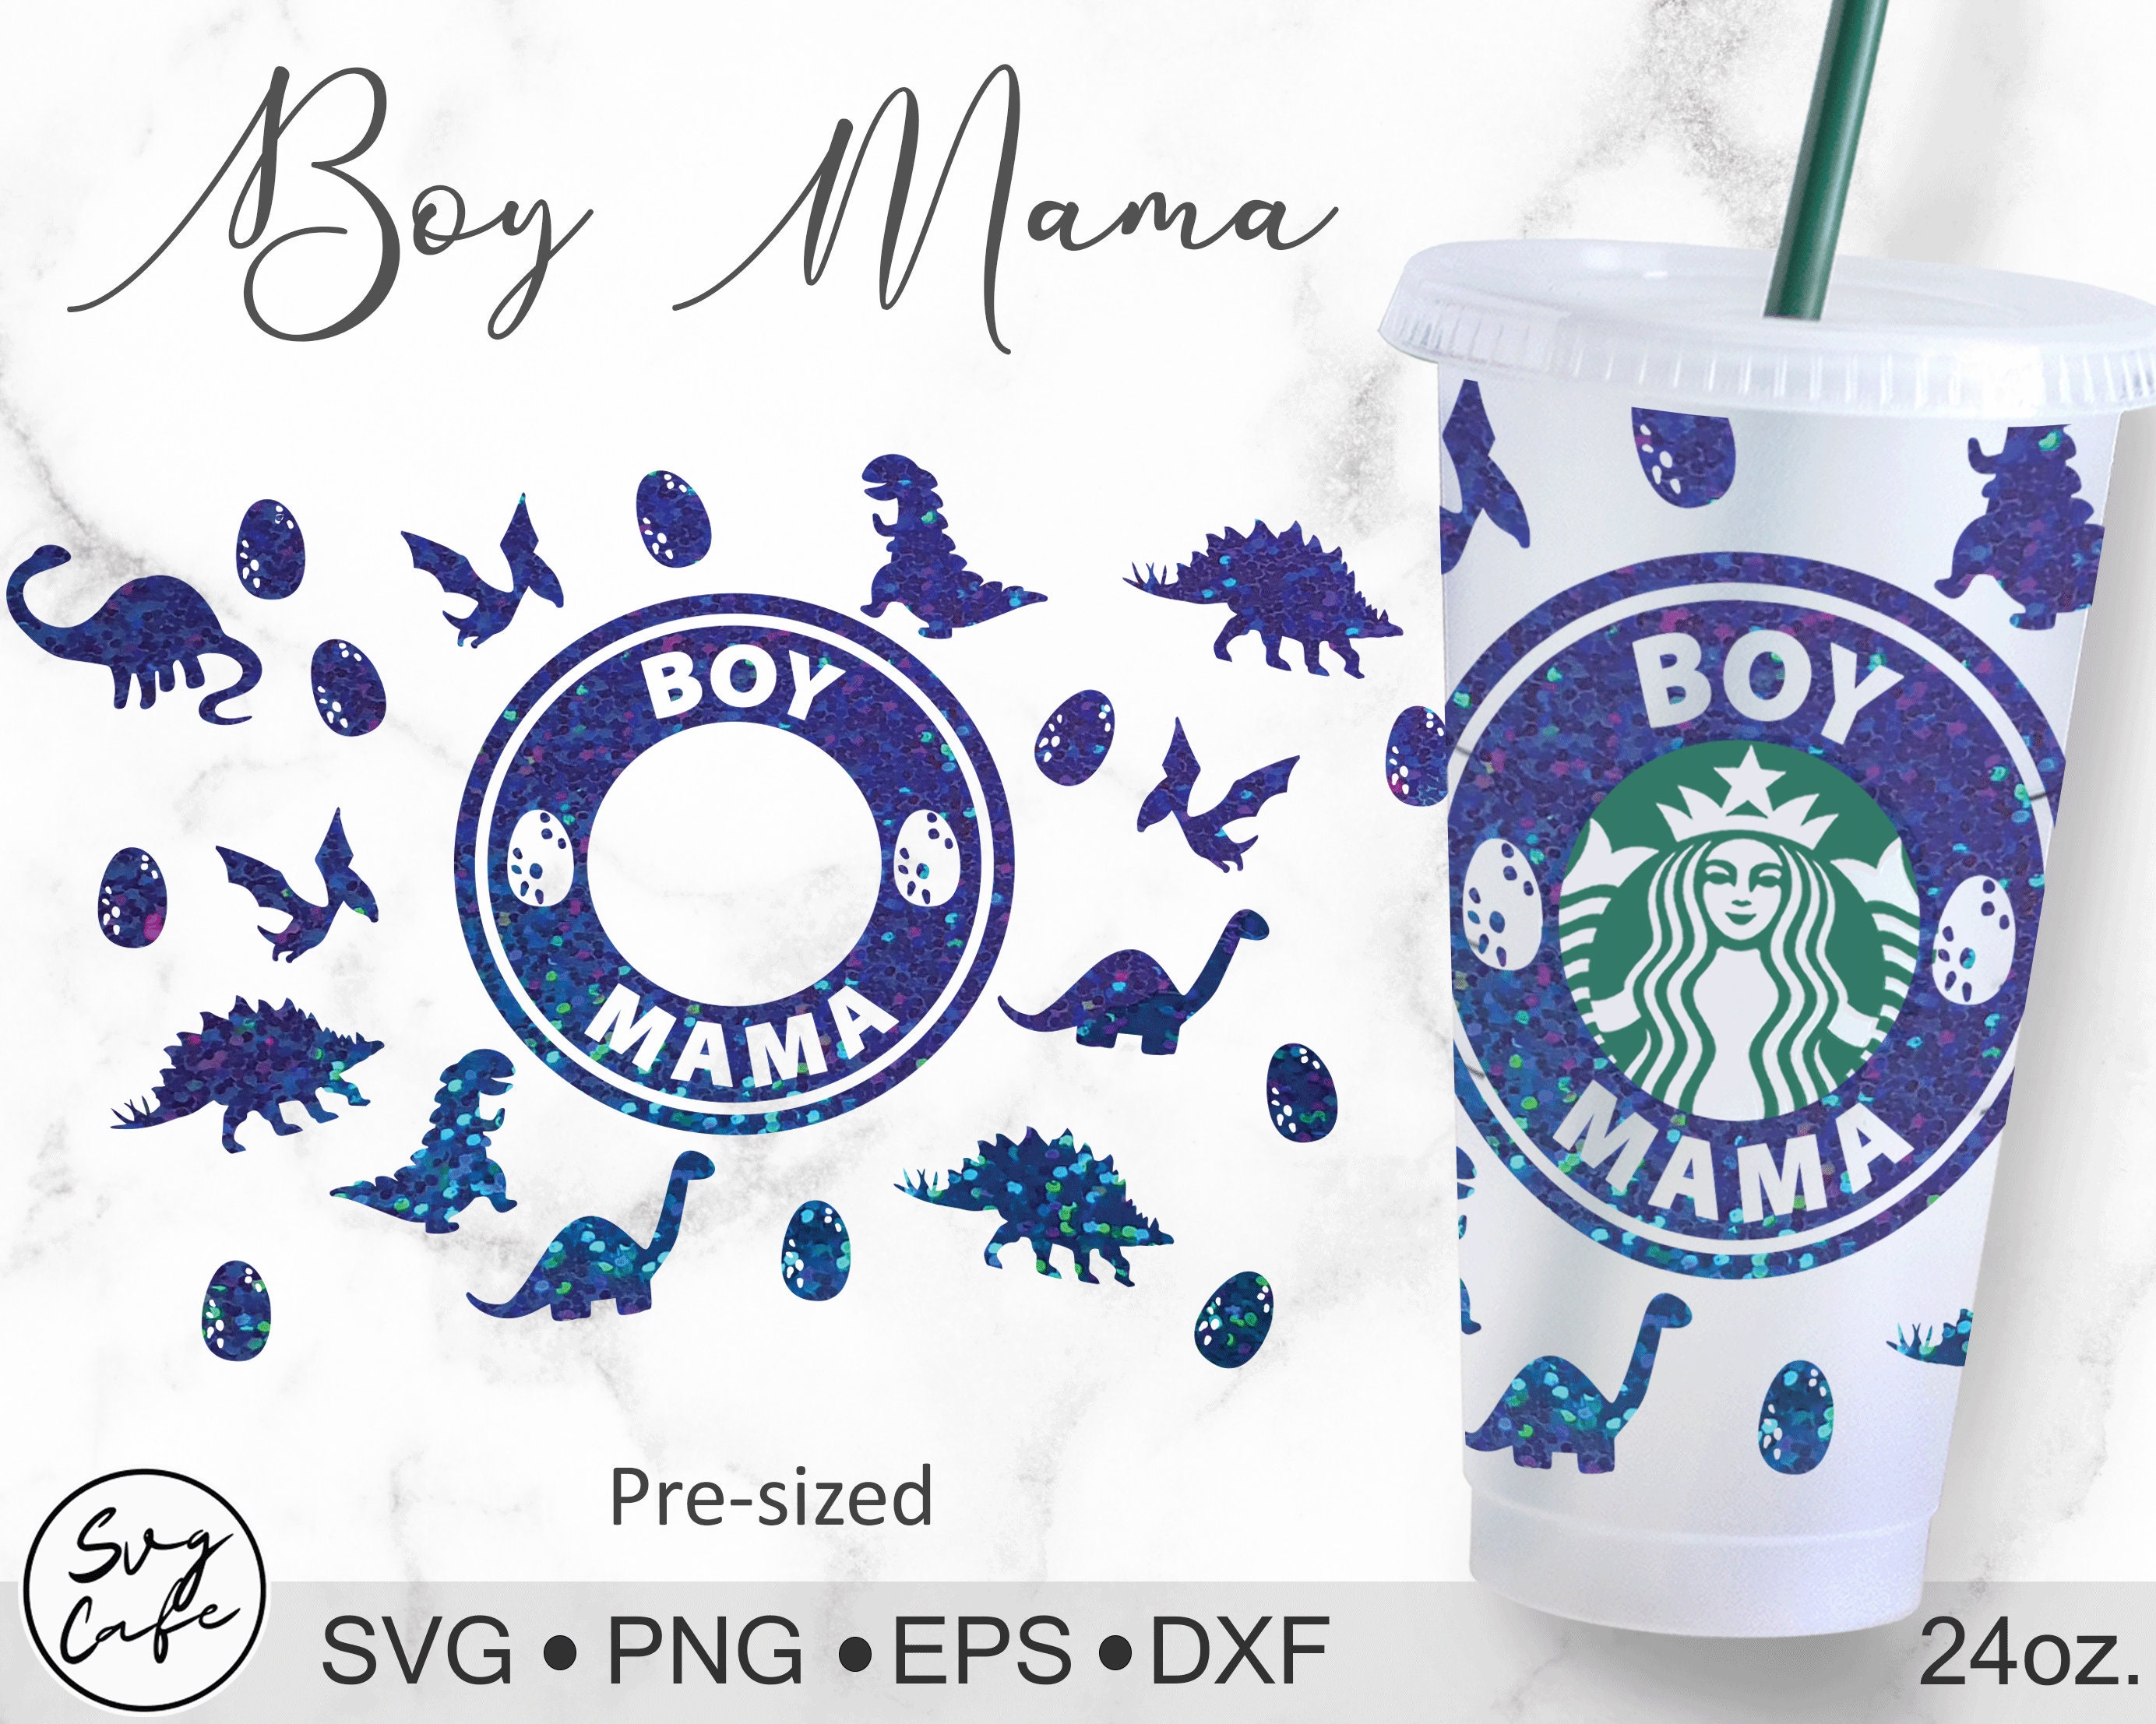 Updated* Decal Size Guide for Starbucks Cups - Kayla Makes